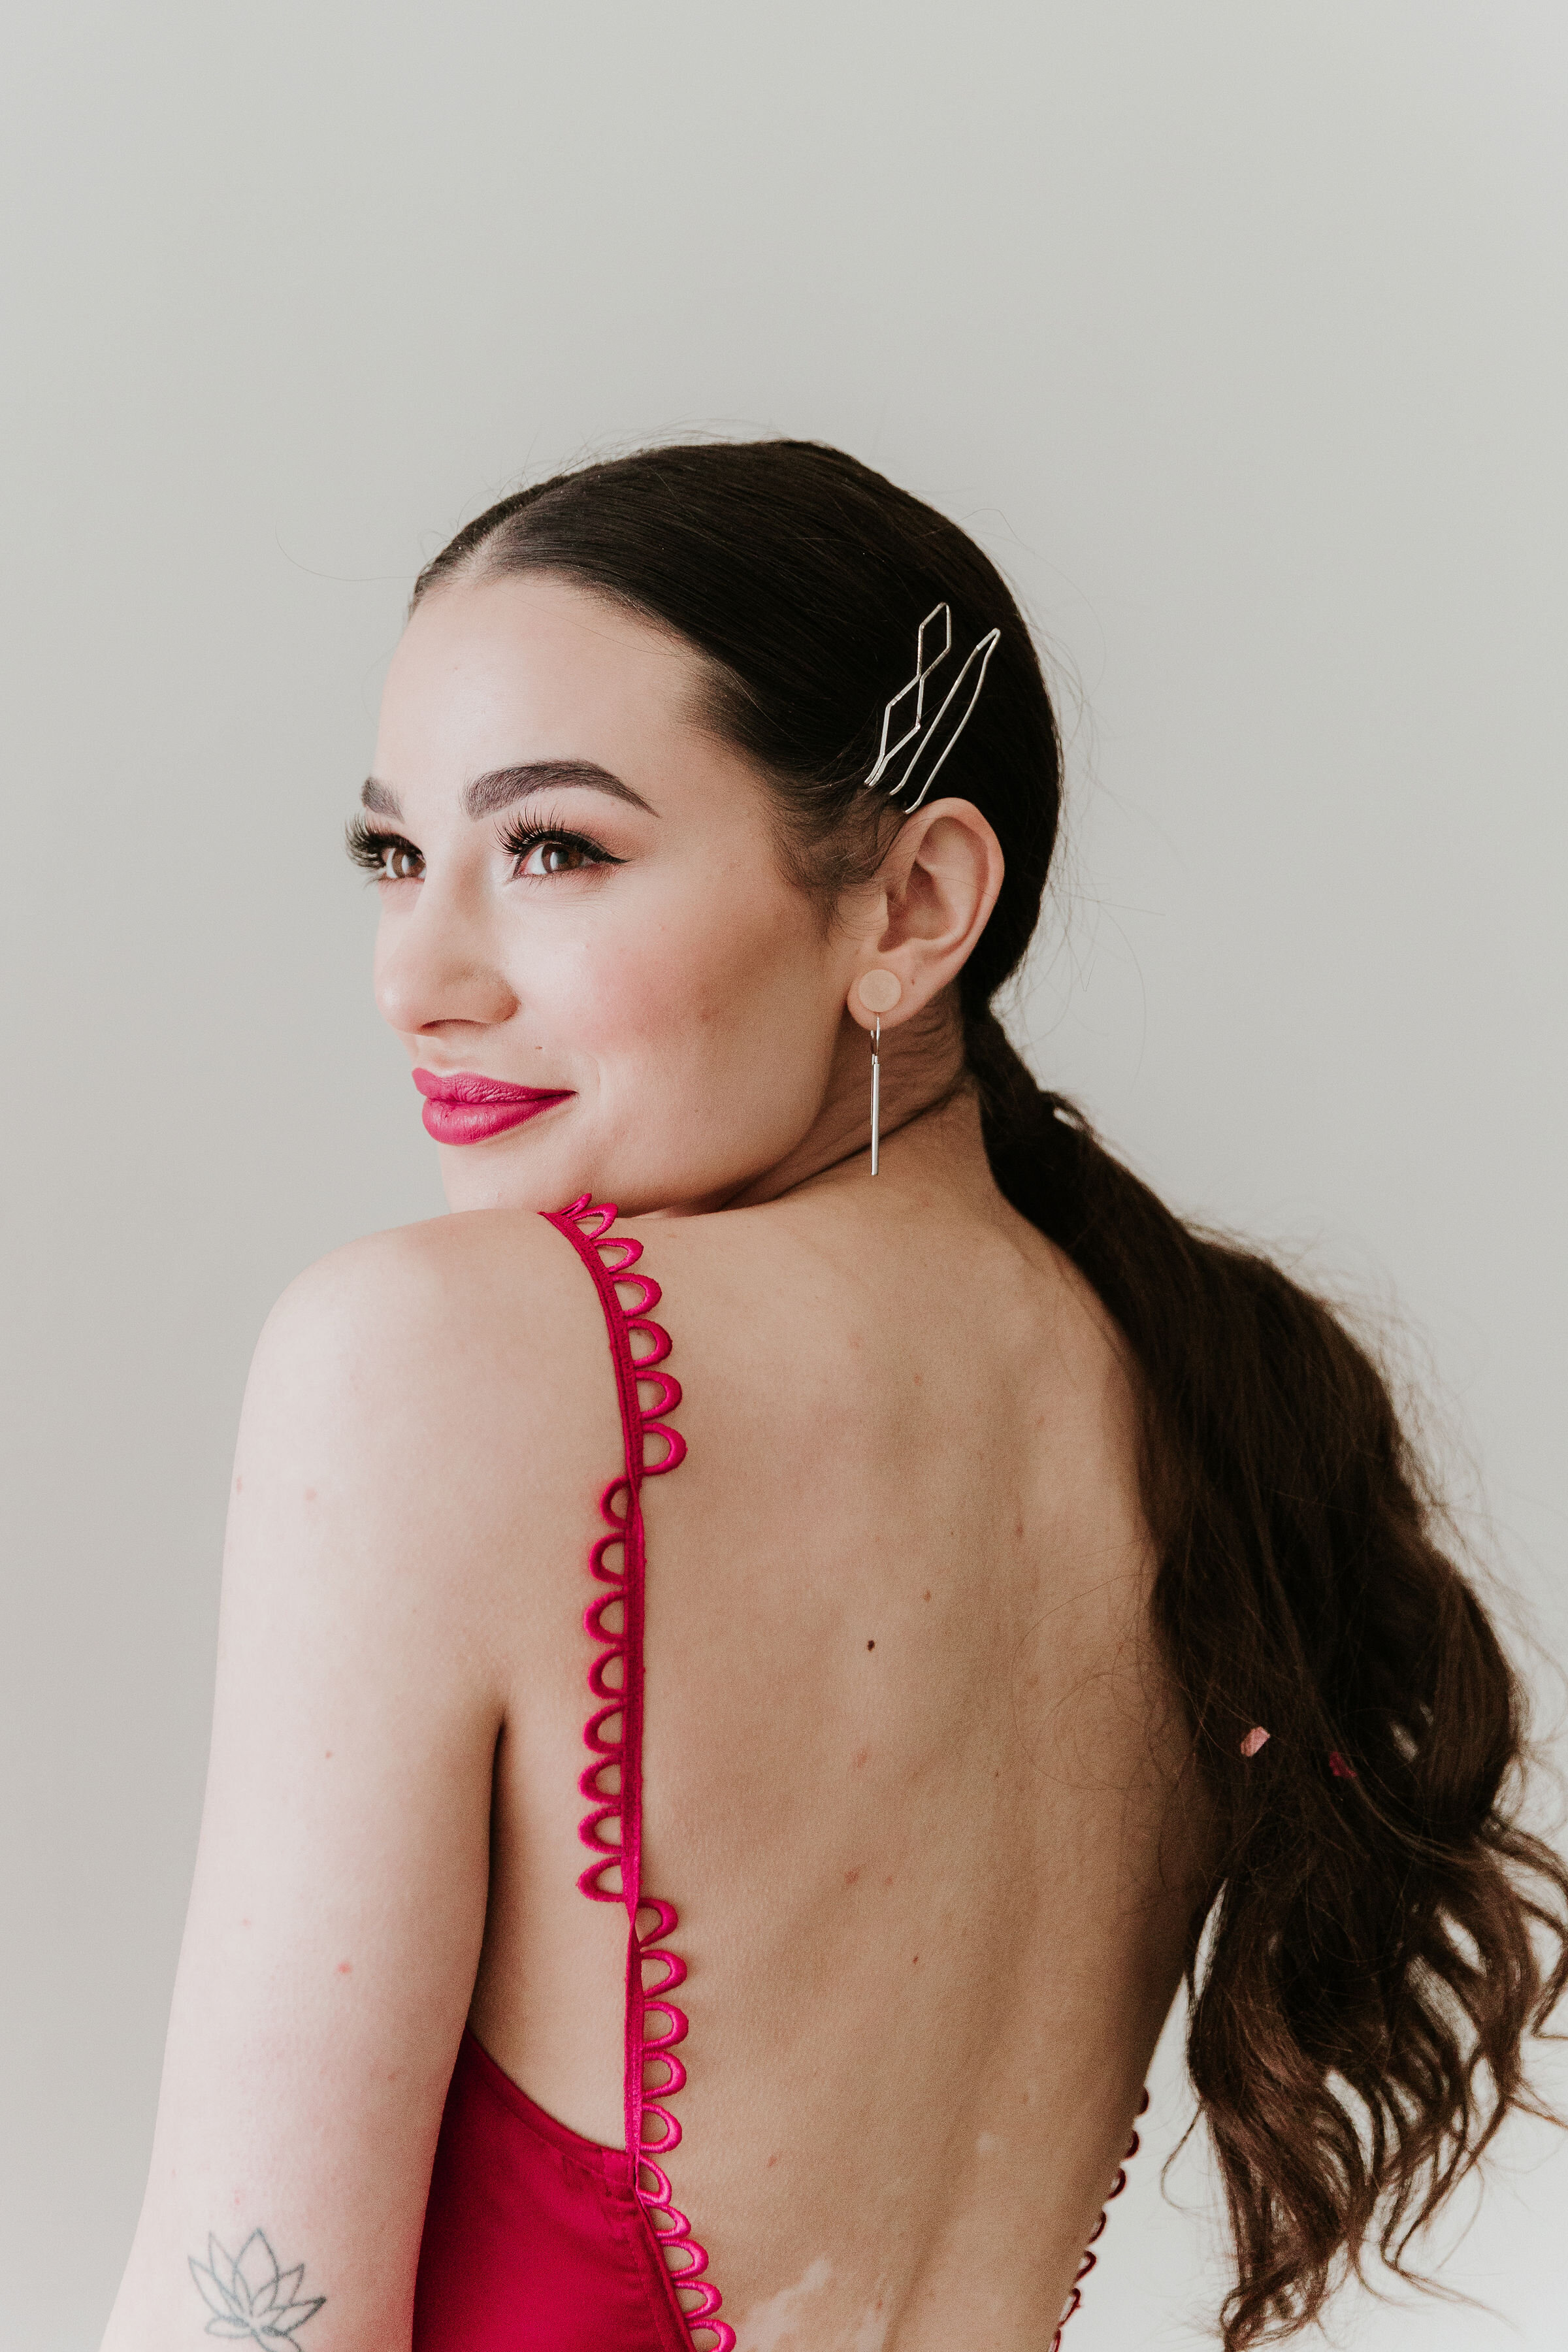 8 Glam Ponytail Hairstyles Every Bridesmaid Can Rock - on the Bronte Bride Blog